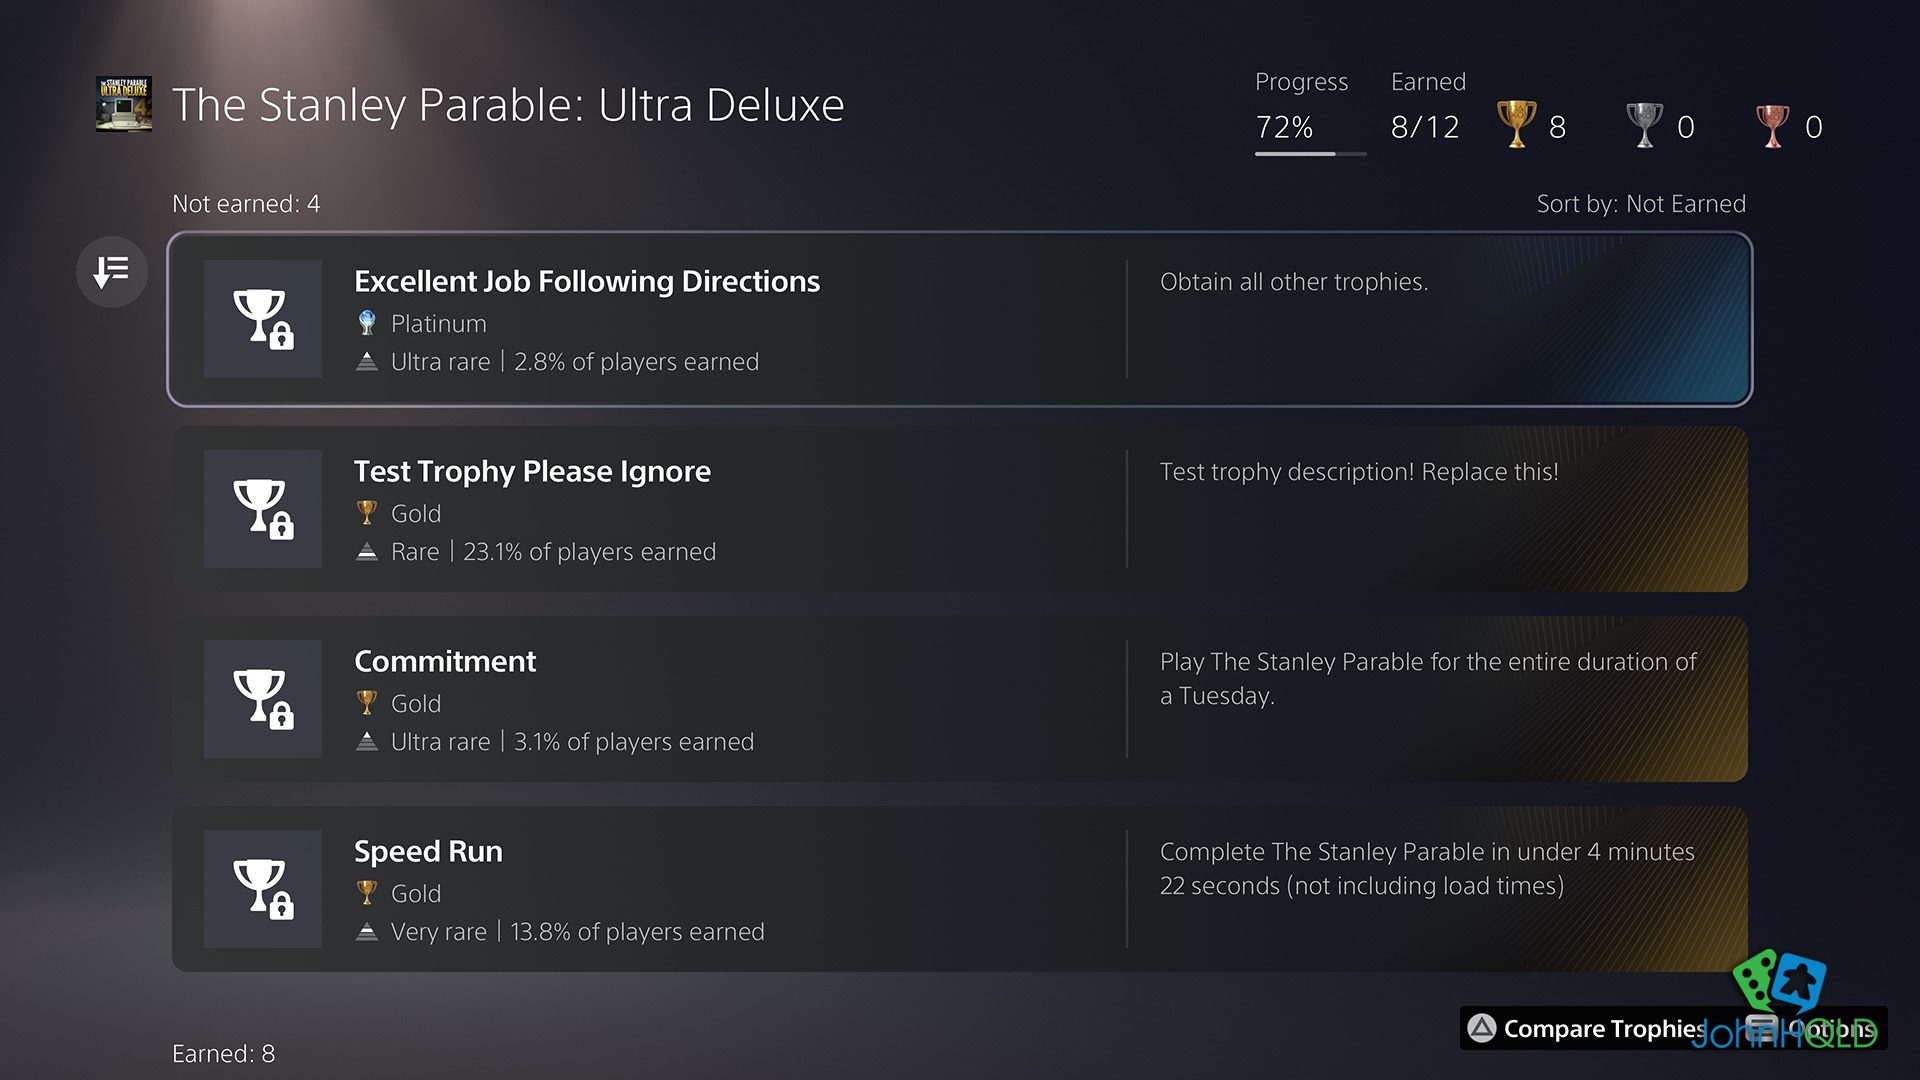 20220613 - Stanley Parable Ultra Deluxe - The Platinum is within sight